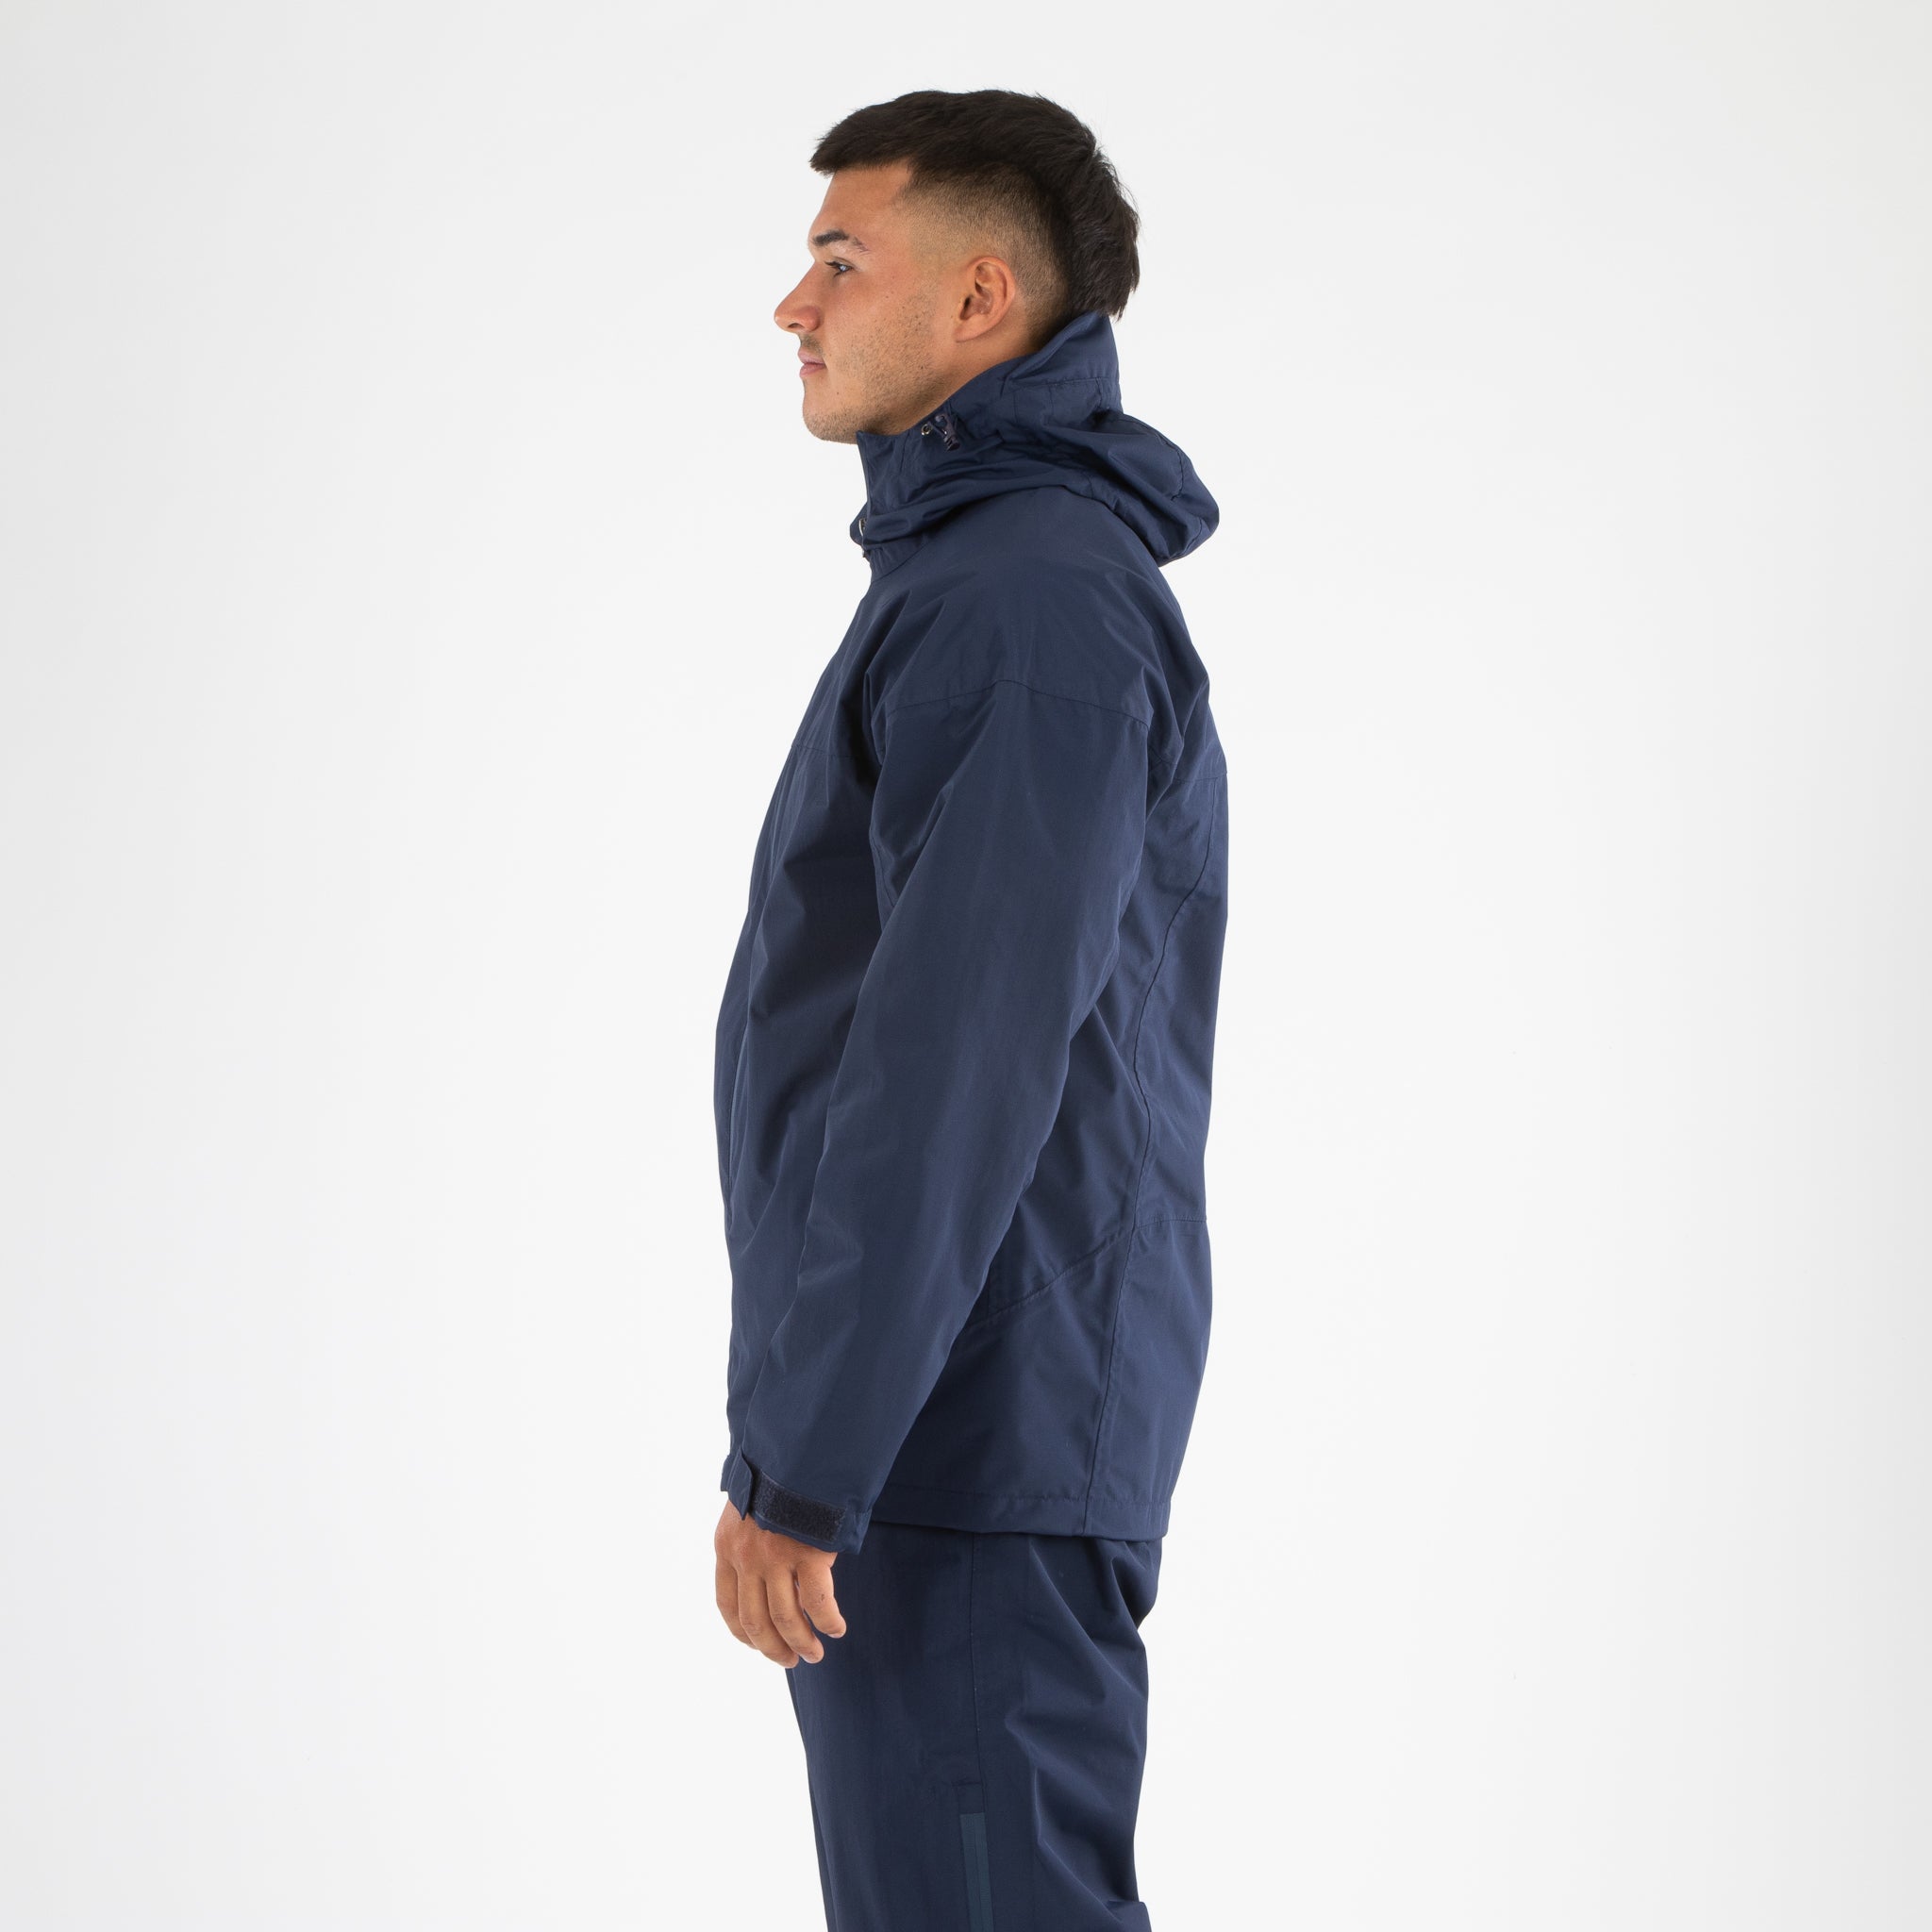 VX3 Protego Waterproof Jacket Navy Side View